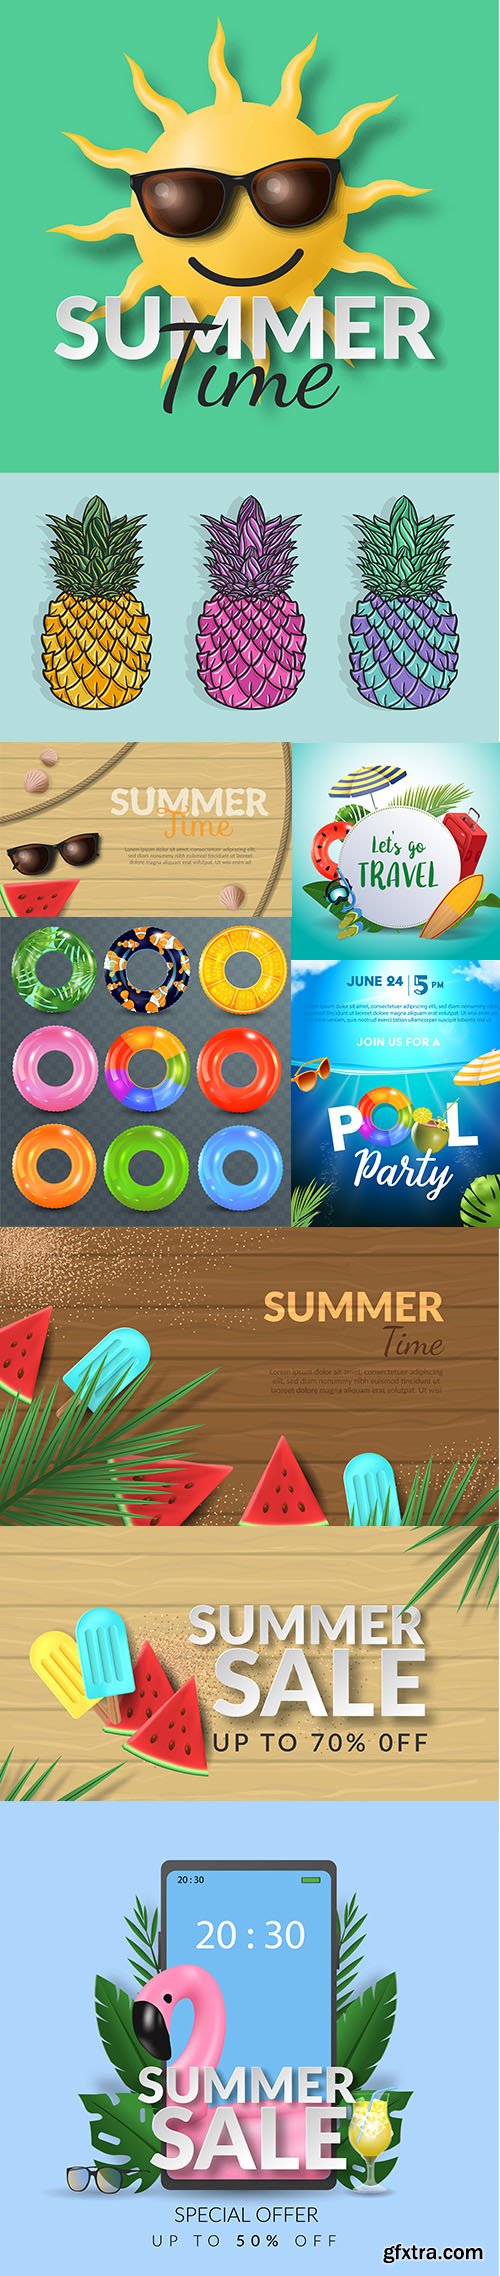 Summer Time Backgrounds